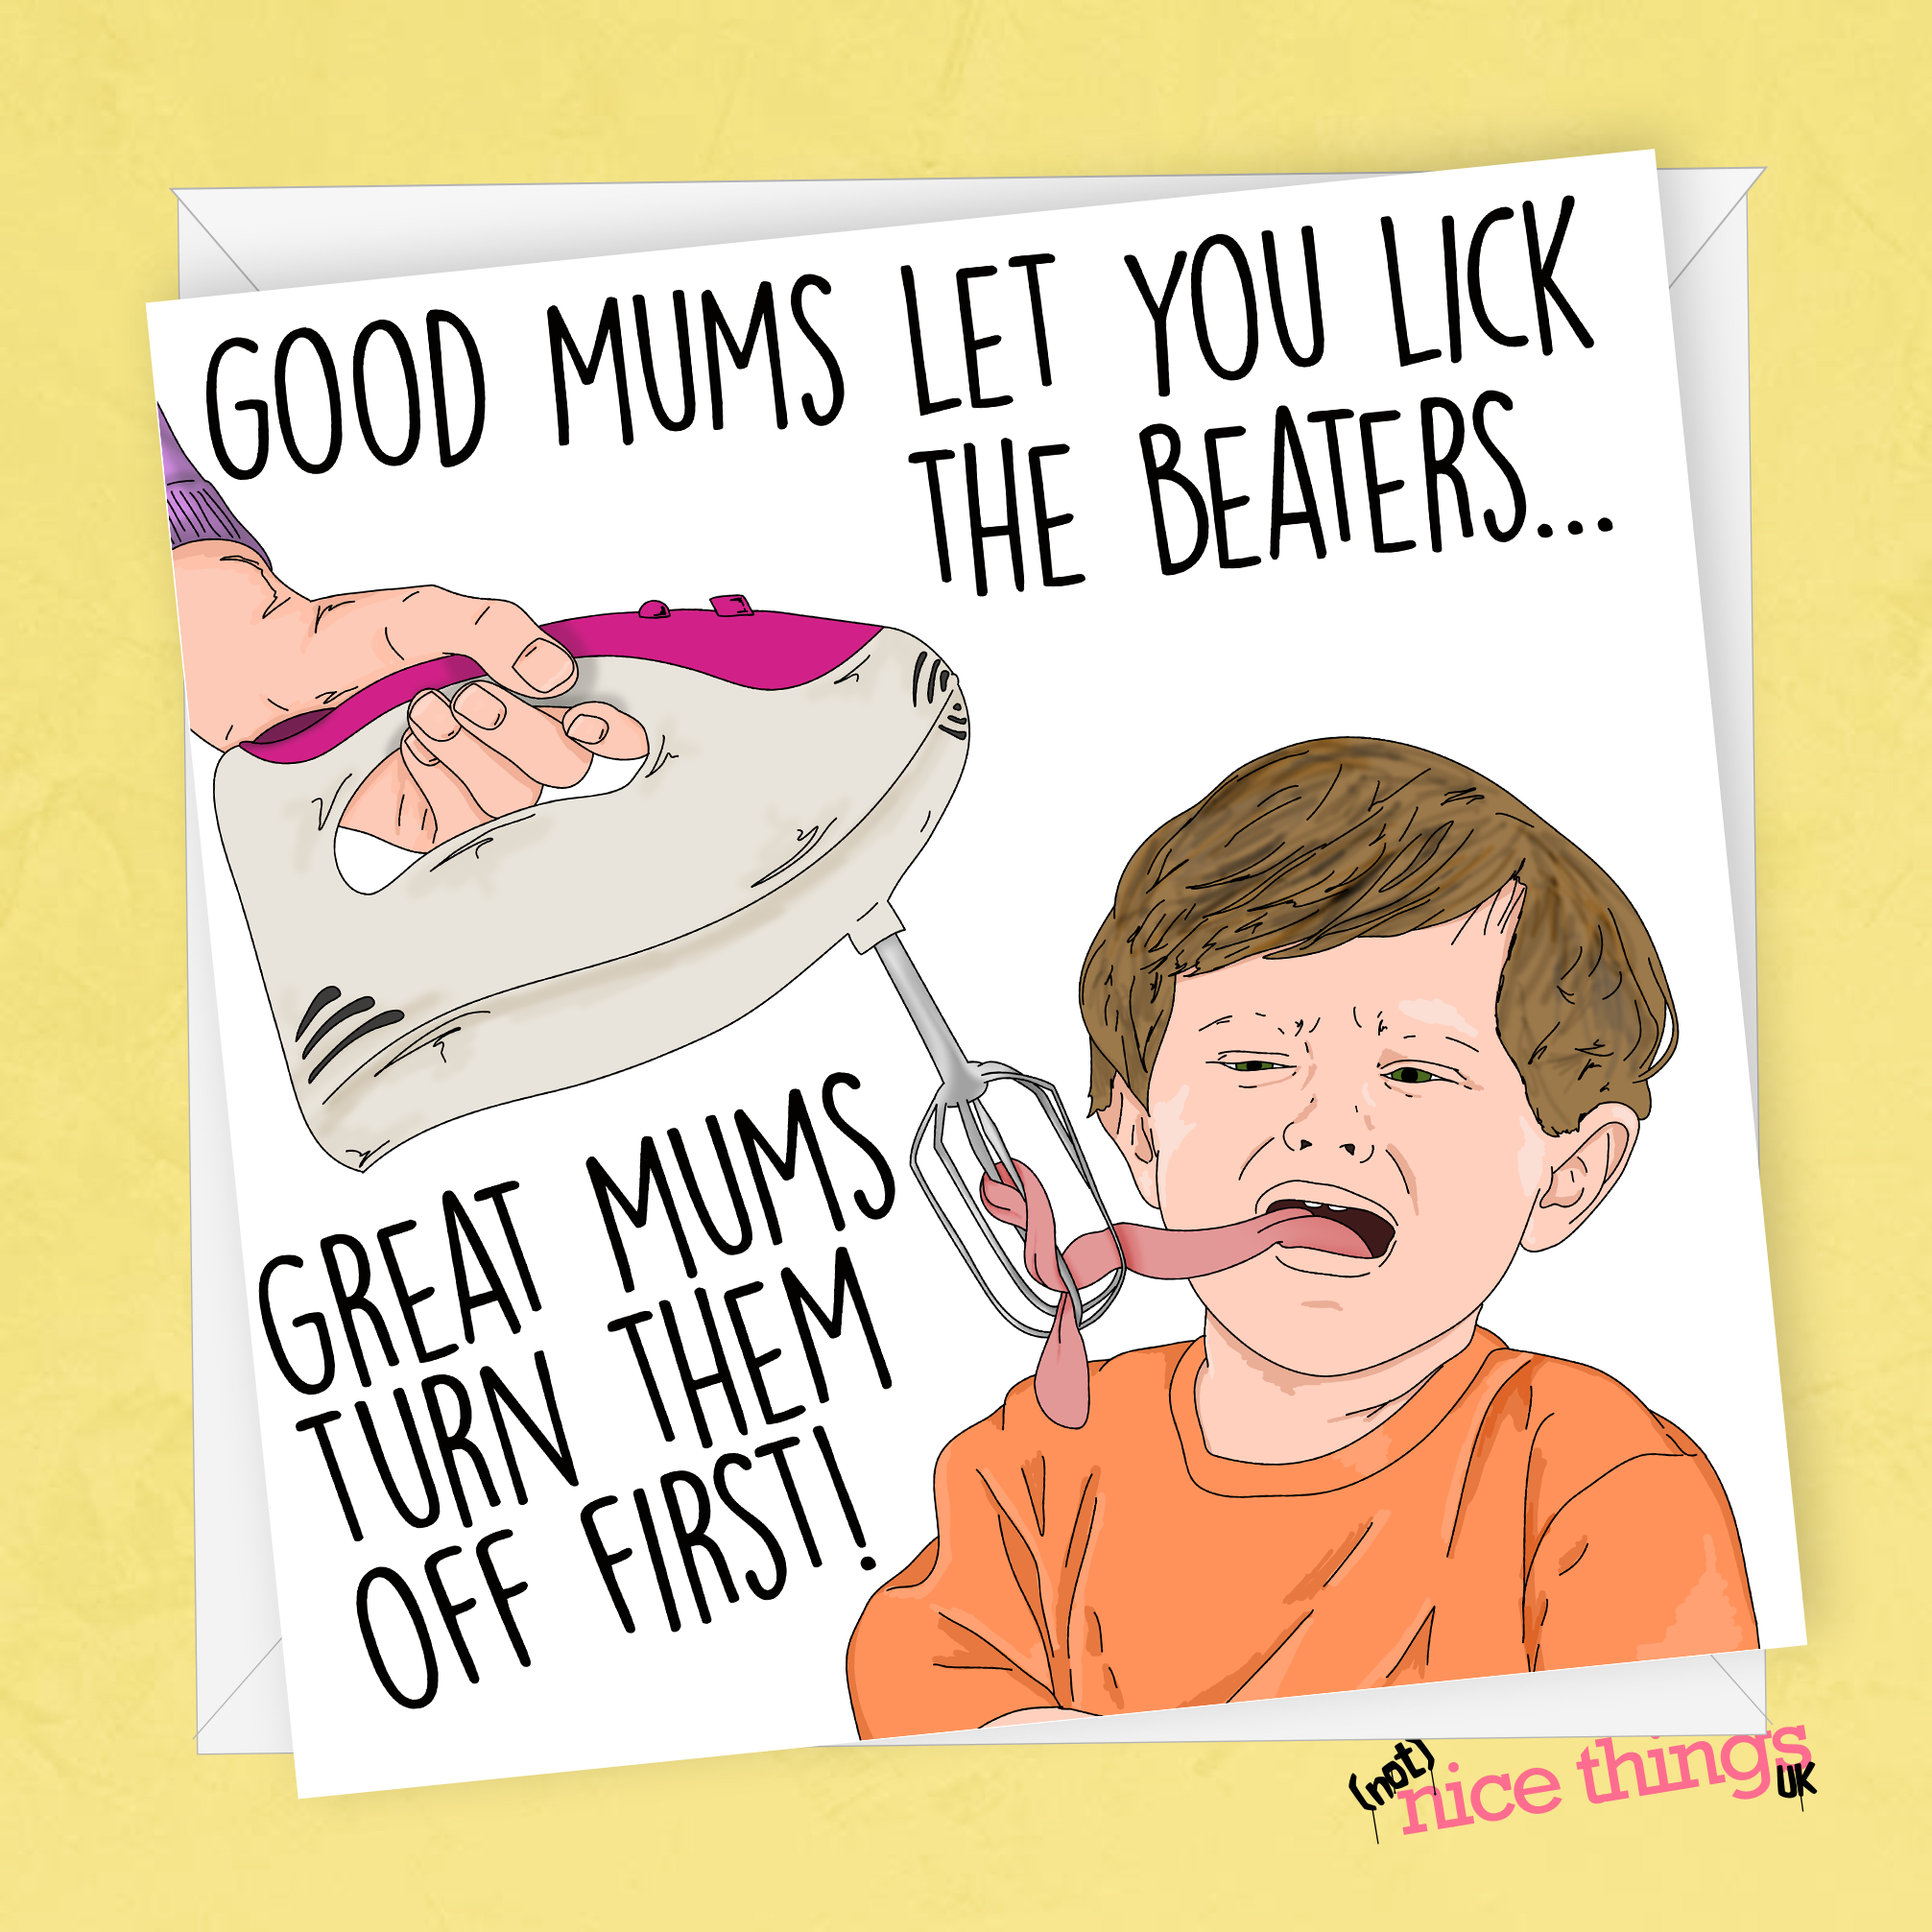 Lick the Beaters Mother's Day Card, Rude Card for Mum, Funny Mothers Day Card, Mother Day Gift, Bake Off Mother's Day Card, Baking Mum